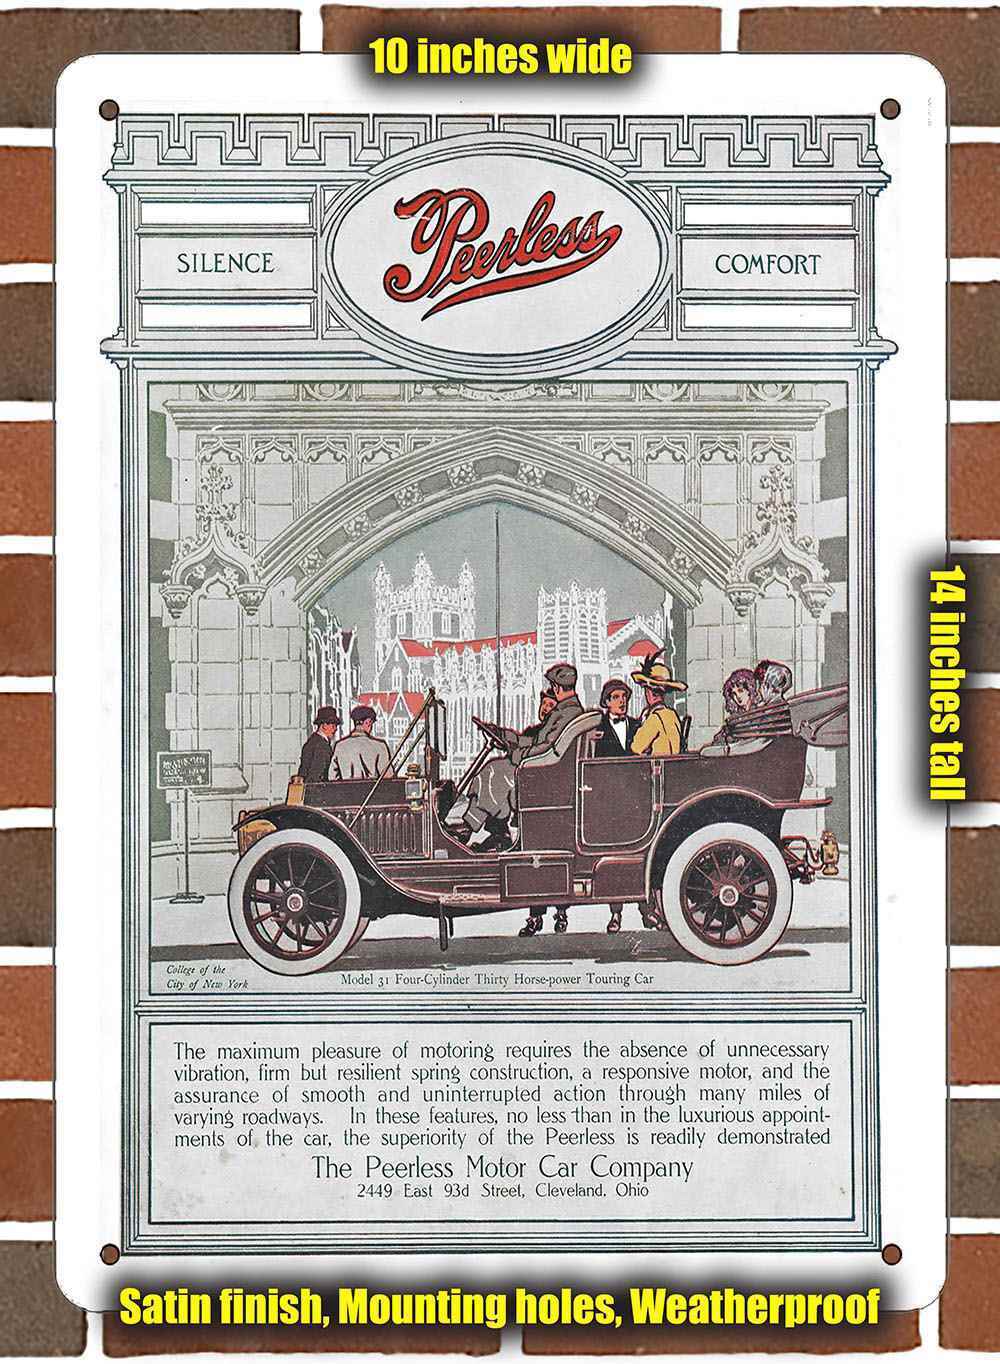 Metal Sign - 1911 Peerless Model 31 Four-Cylinder- 10x14 inches